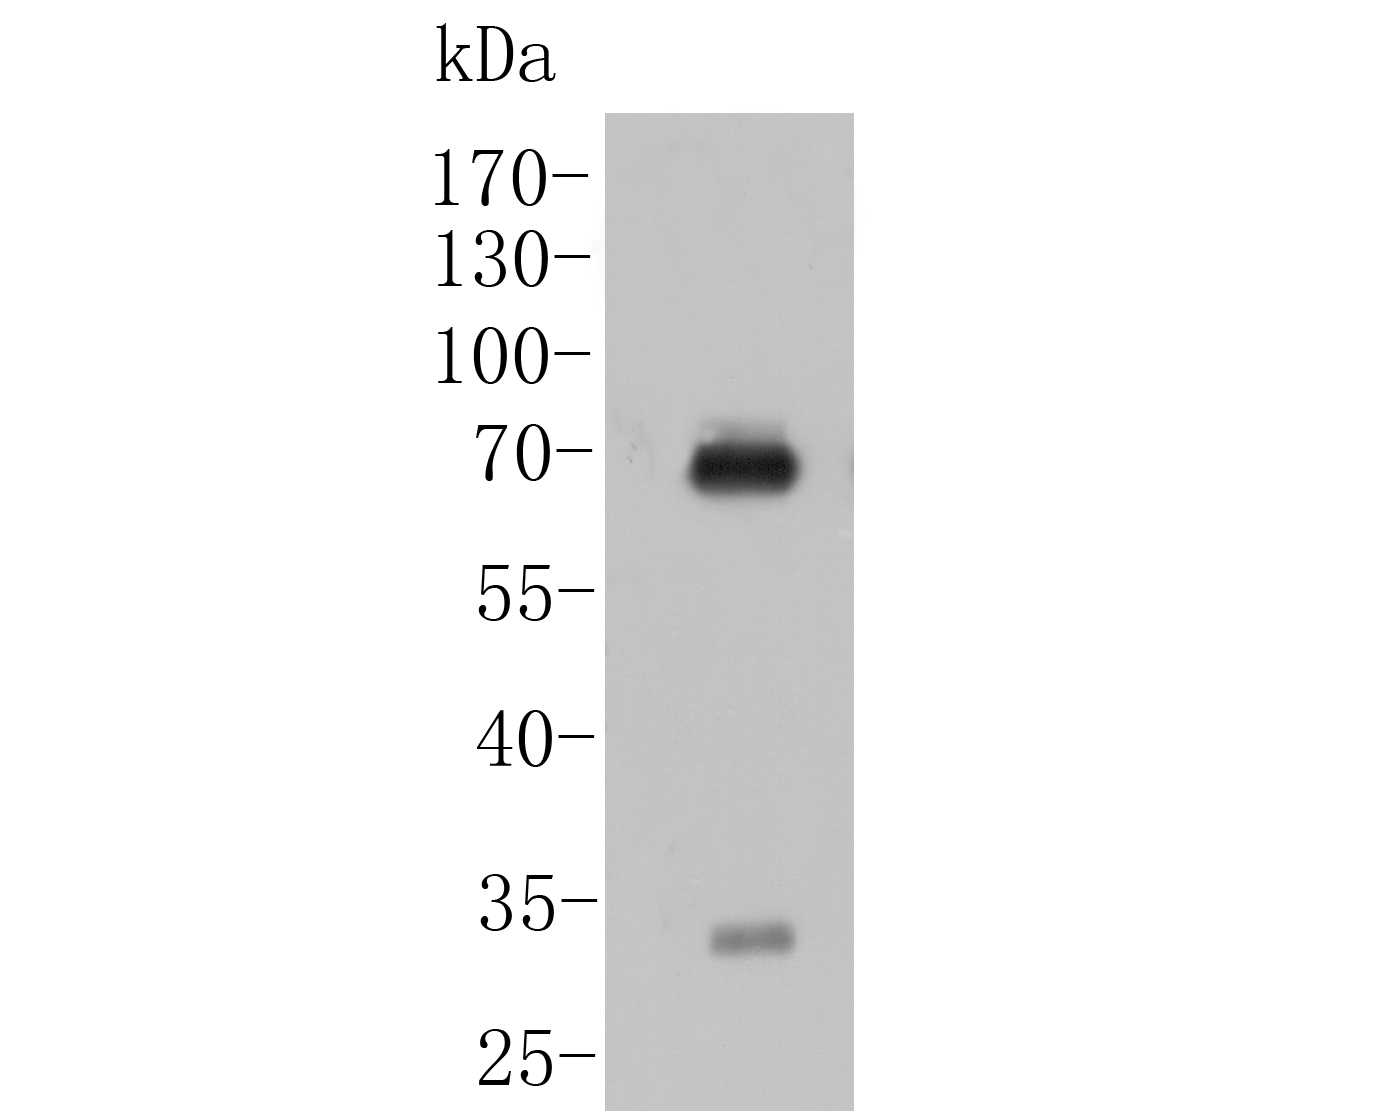 Western blot analysis of IgA on Human plasma tissue lysates. Proteins were transferred to a PVDF membrane and blocked with 5% BSA in PBS for 1 hour at room temperature. The primary antibody (M1510-31, 1/1,000) was used in 5% BSA at room temperature for 2 hours. Goat Anti-Mouse IgG - HRP Secondary Antibody (HA1006) at 1:5,000 dilution was used for 1 hour at room temperature.